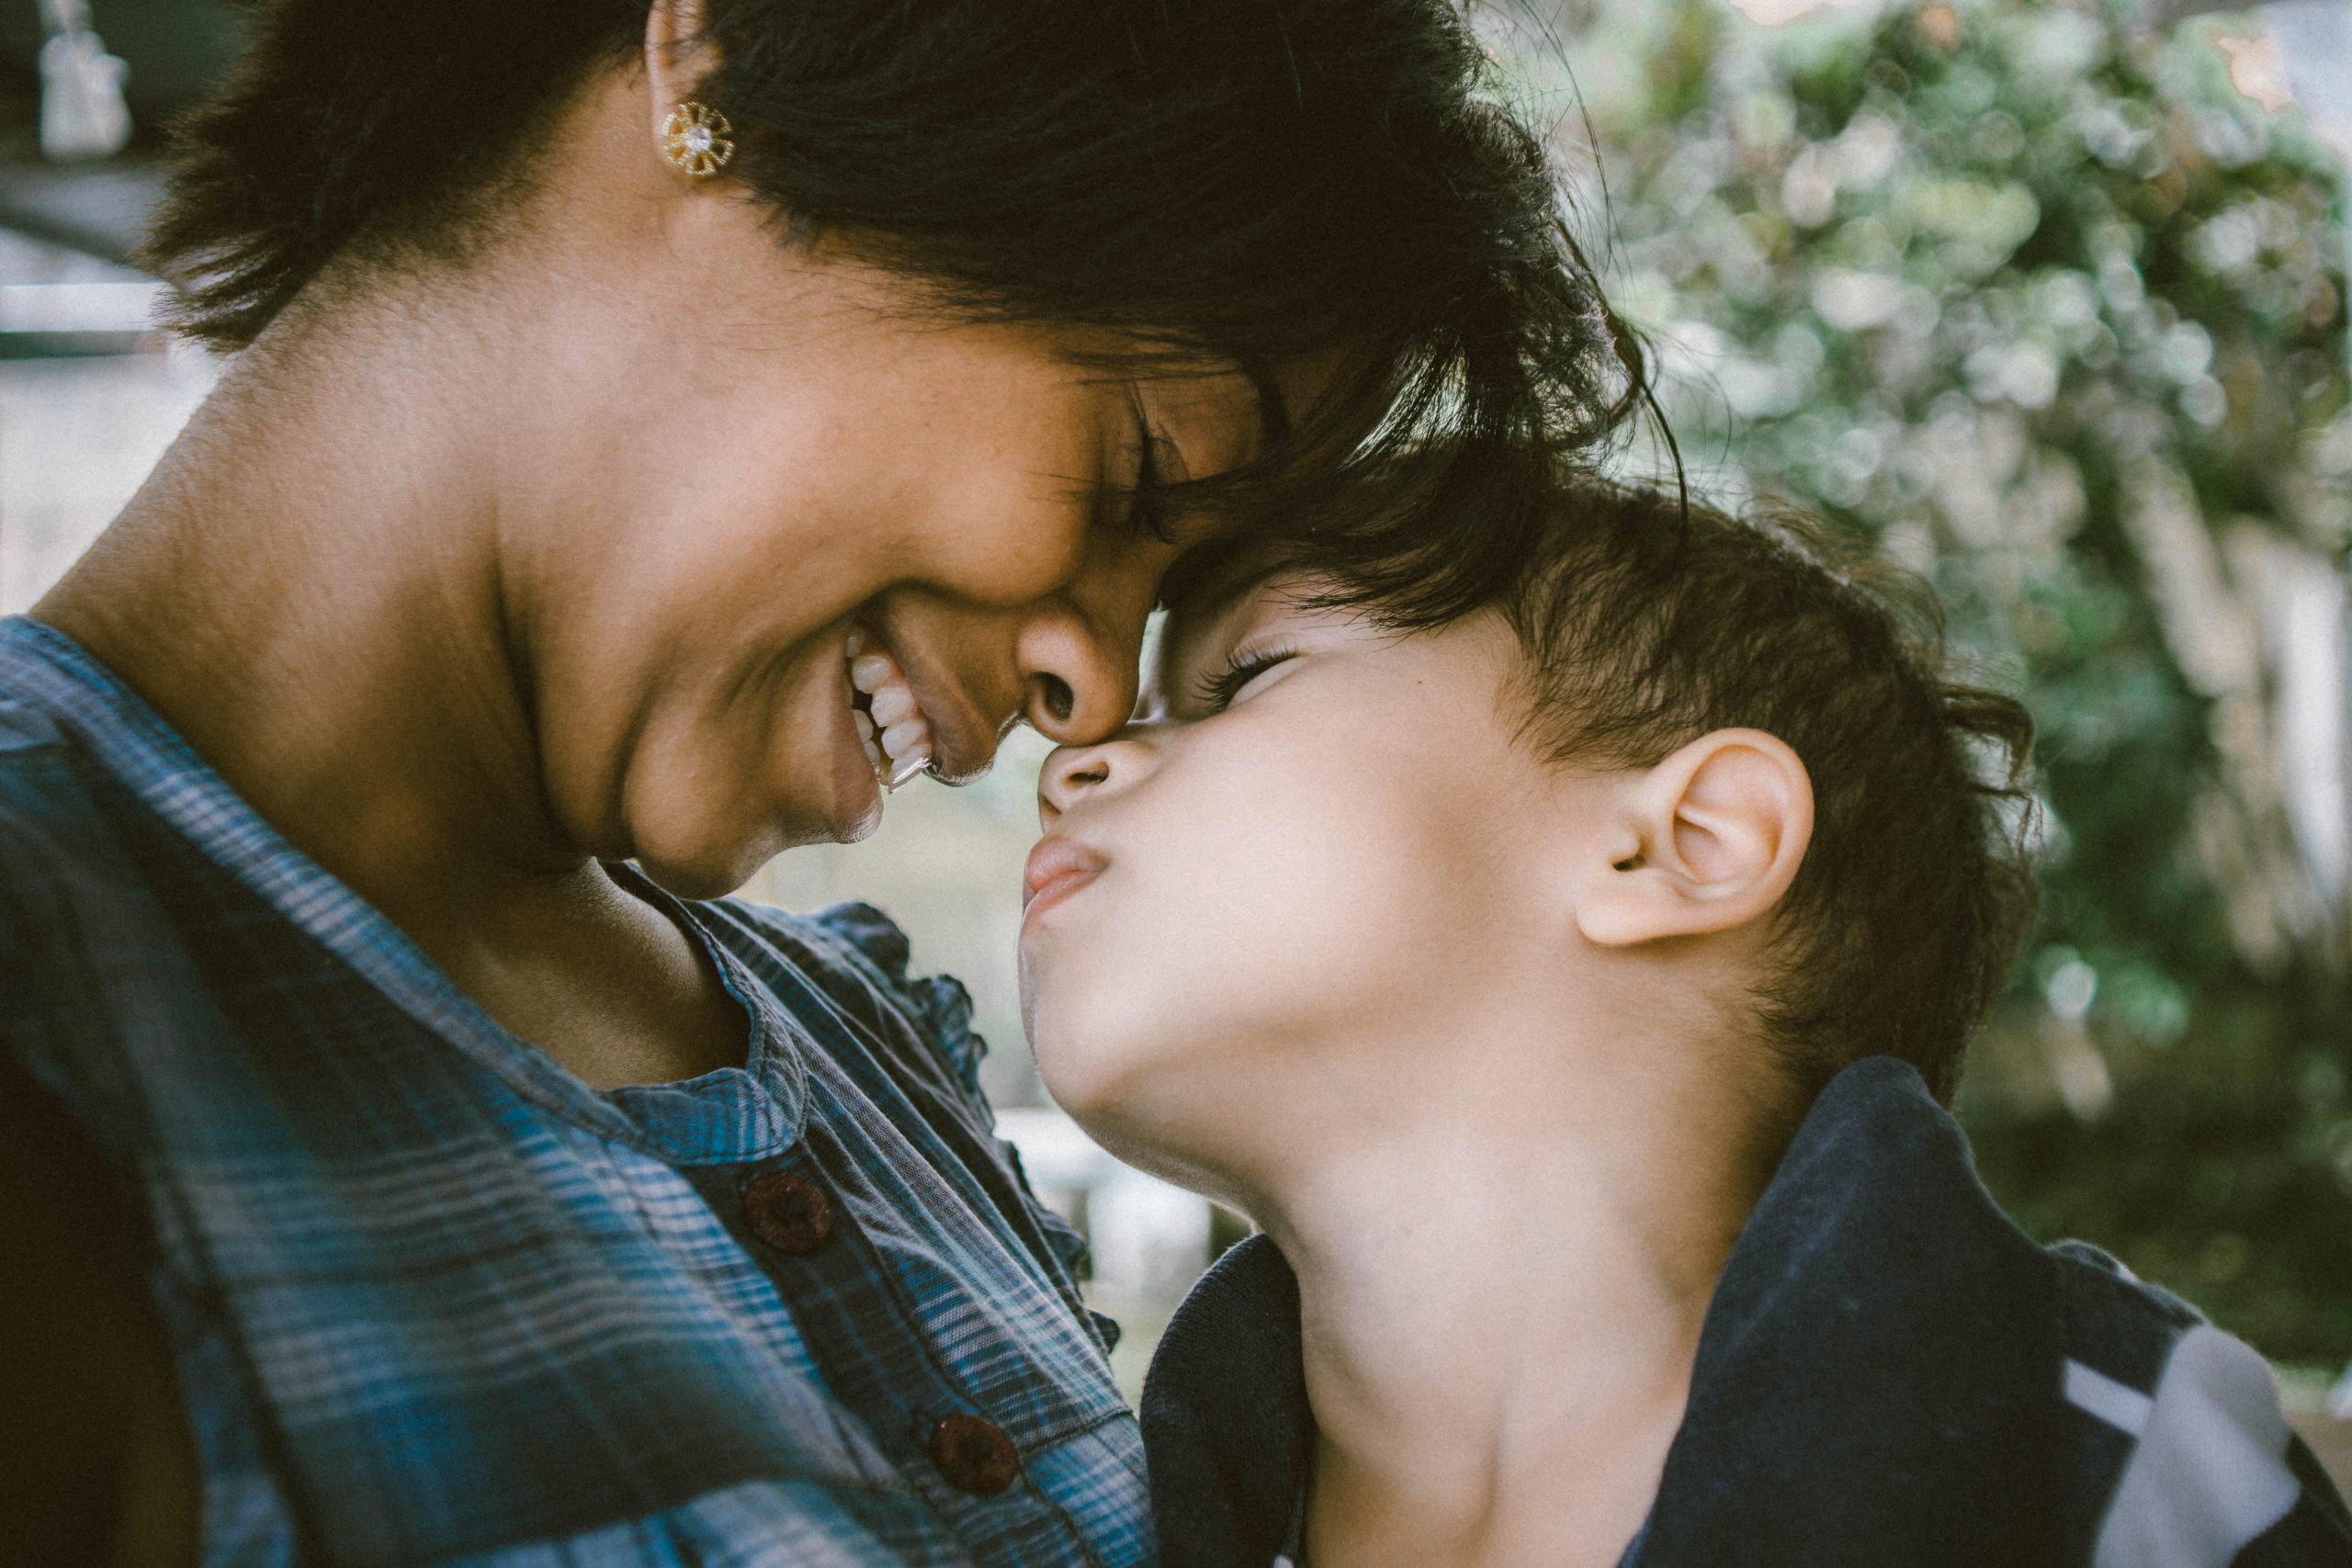 A close-up of a woman and a young boy touching foreheads and smiling. She is wearing a blue plaid shirt, and he has short dark hair and is wearing a navy blazer. They are outdoors with greenery in the background, sharing a tender moment after visiting the trauma clinic for PTSD treatment.